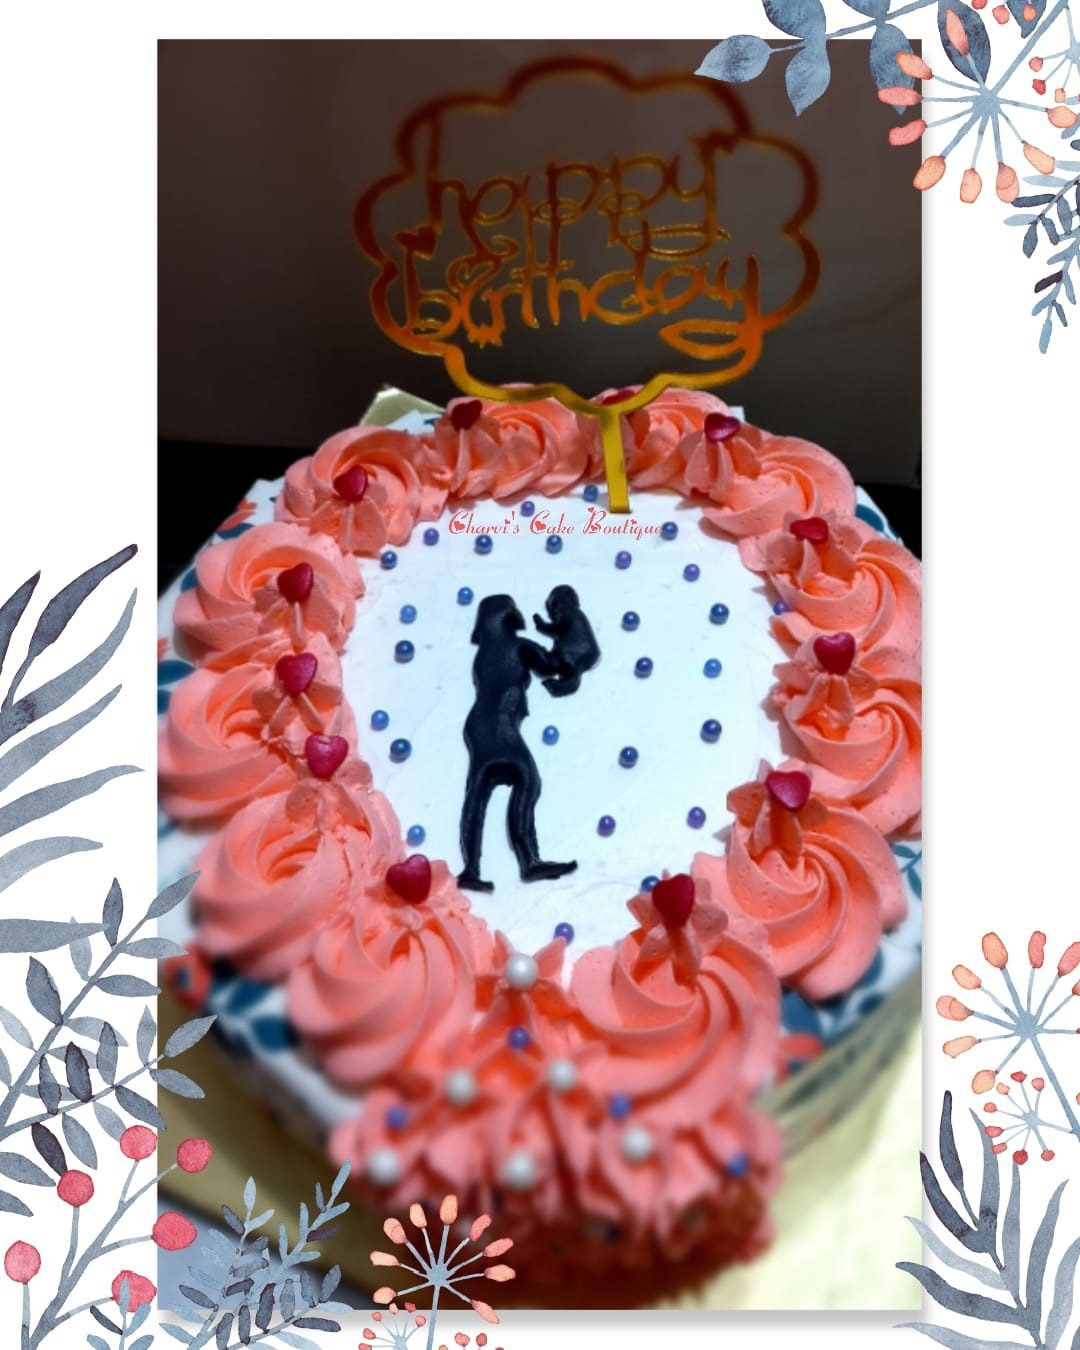 Mothers Day Theme Cake Designs, Images, Price Near Me